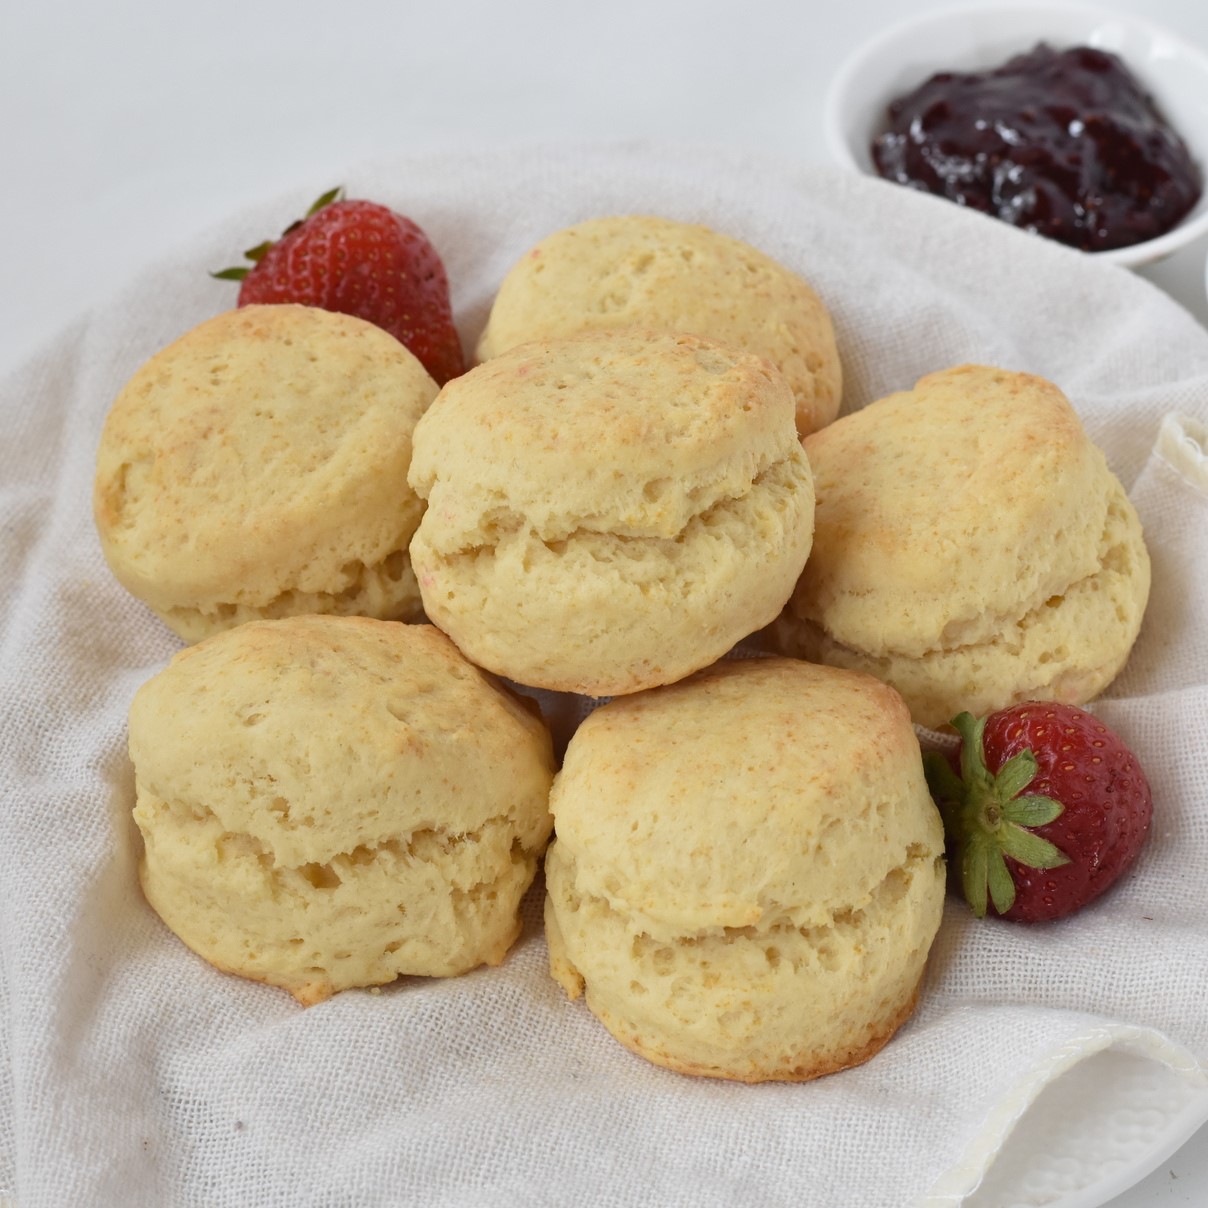 Scones stacked up on a plate with jam.